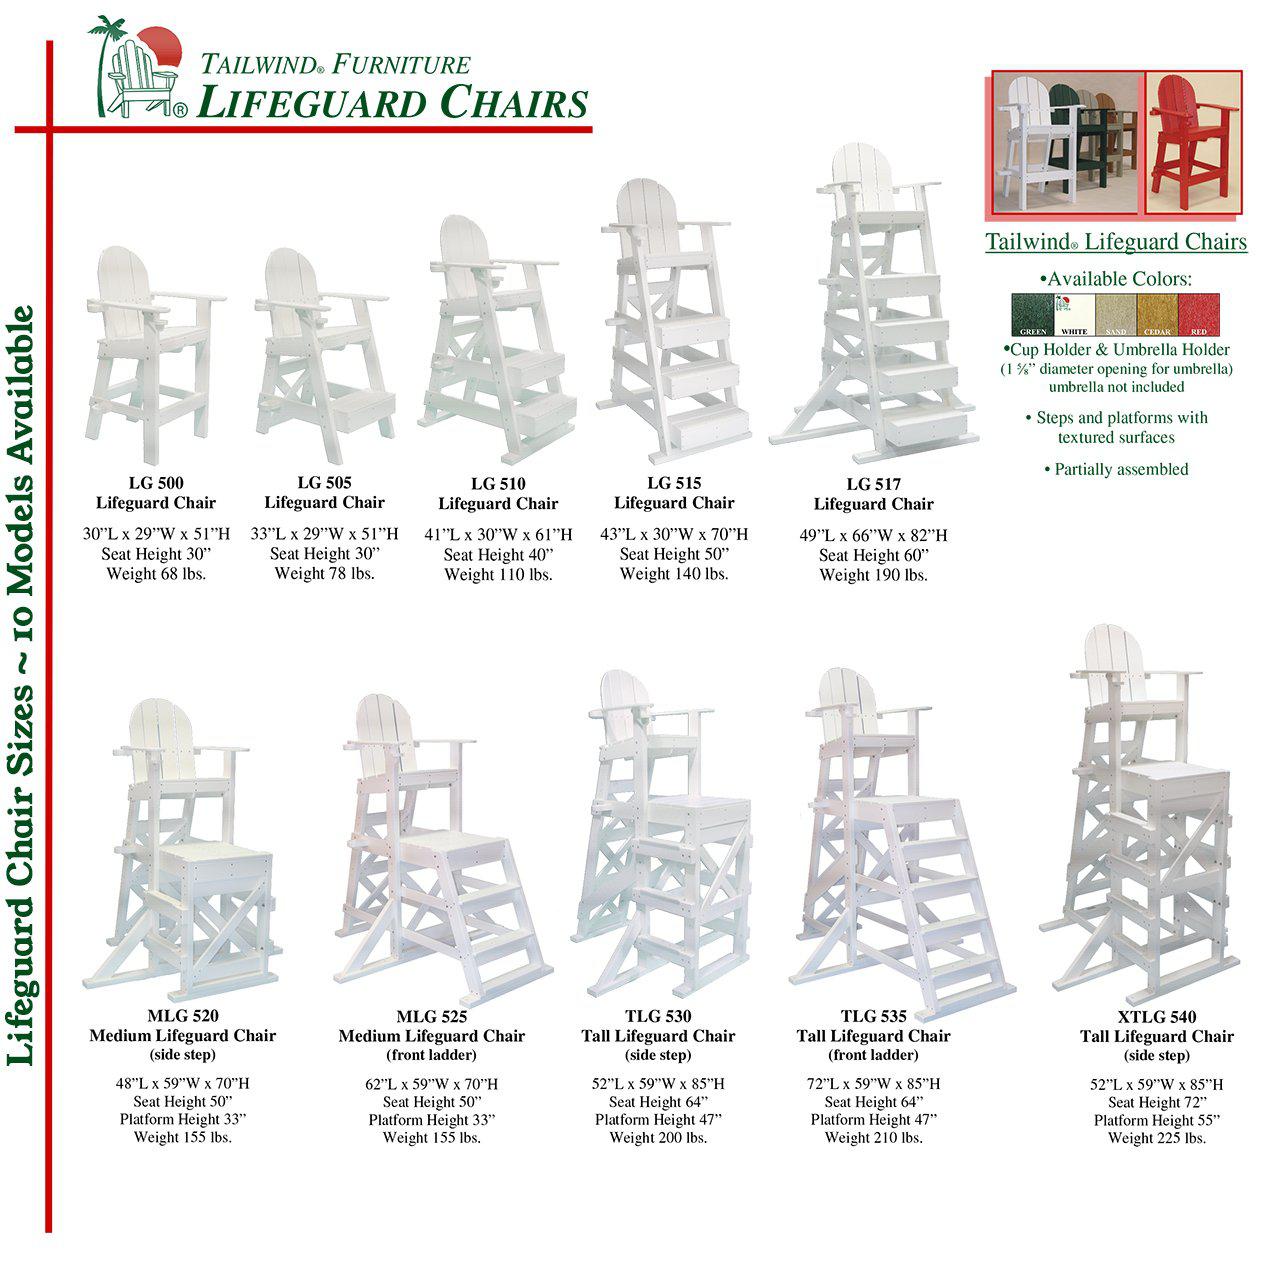 Tailwind Furniture Recycled Plastic TLG-530 Tall Lifeguard Chair with Side Steps - Seat Height: 64" - LEAD TIME TO SHIP 20 BUSINESS DAYS